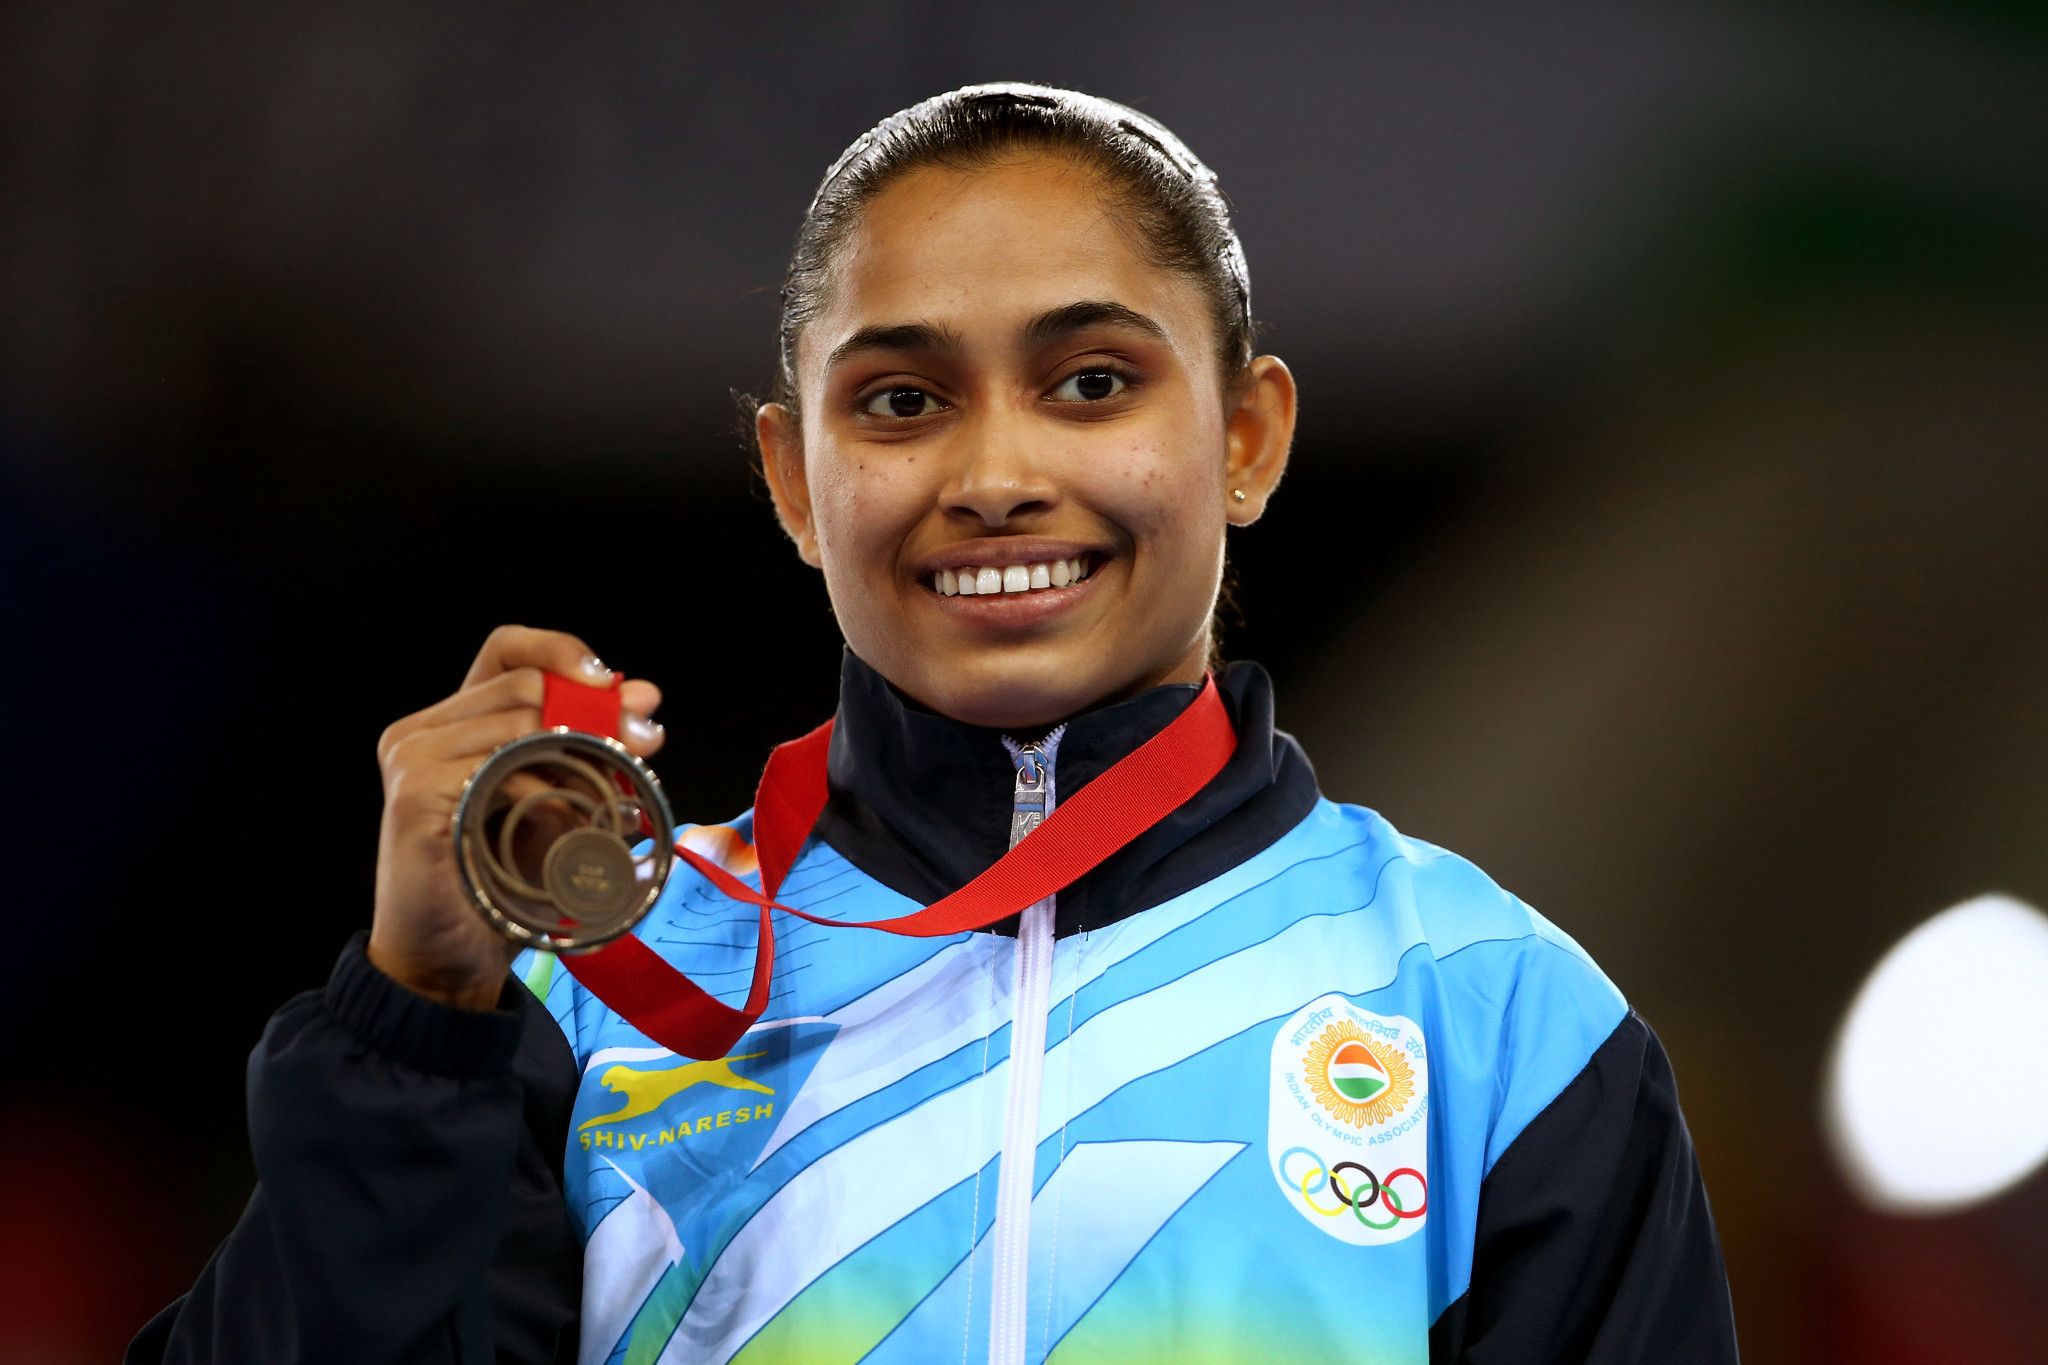 Dipa Karmakar has established herself as India's most successful gymnast and won a Commonwealth Games bronze medal at Glasgow 2014 ©Getty Images